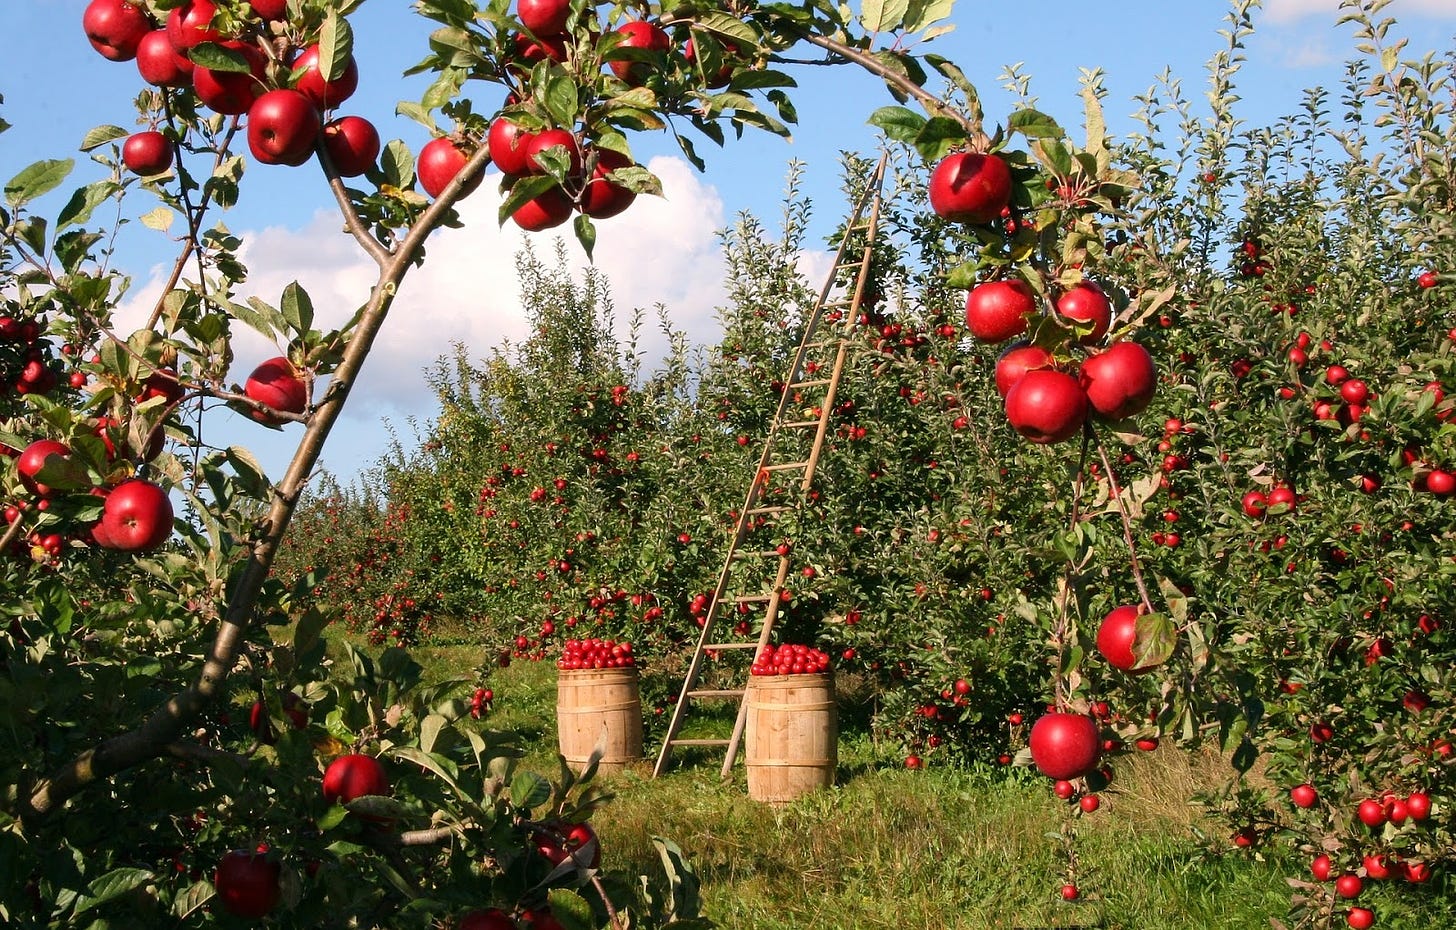 Gorgeous red apples on trees in the process of being harvested.